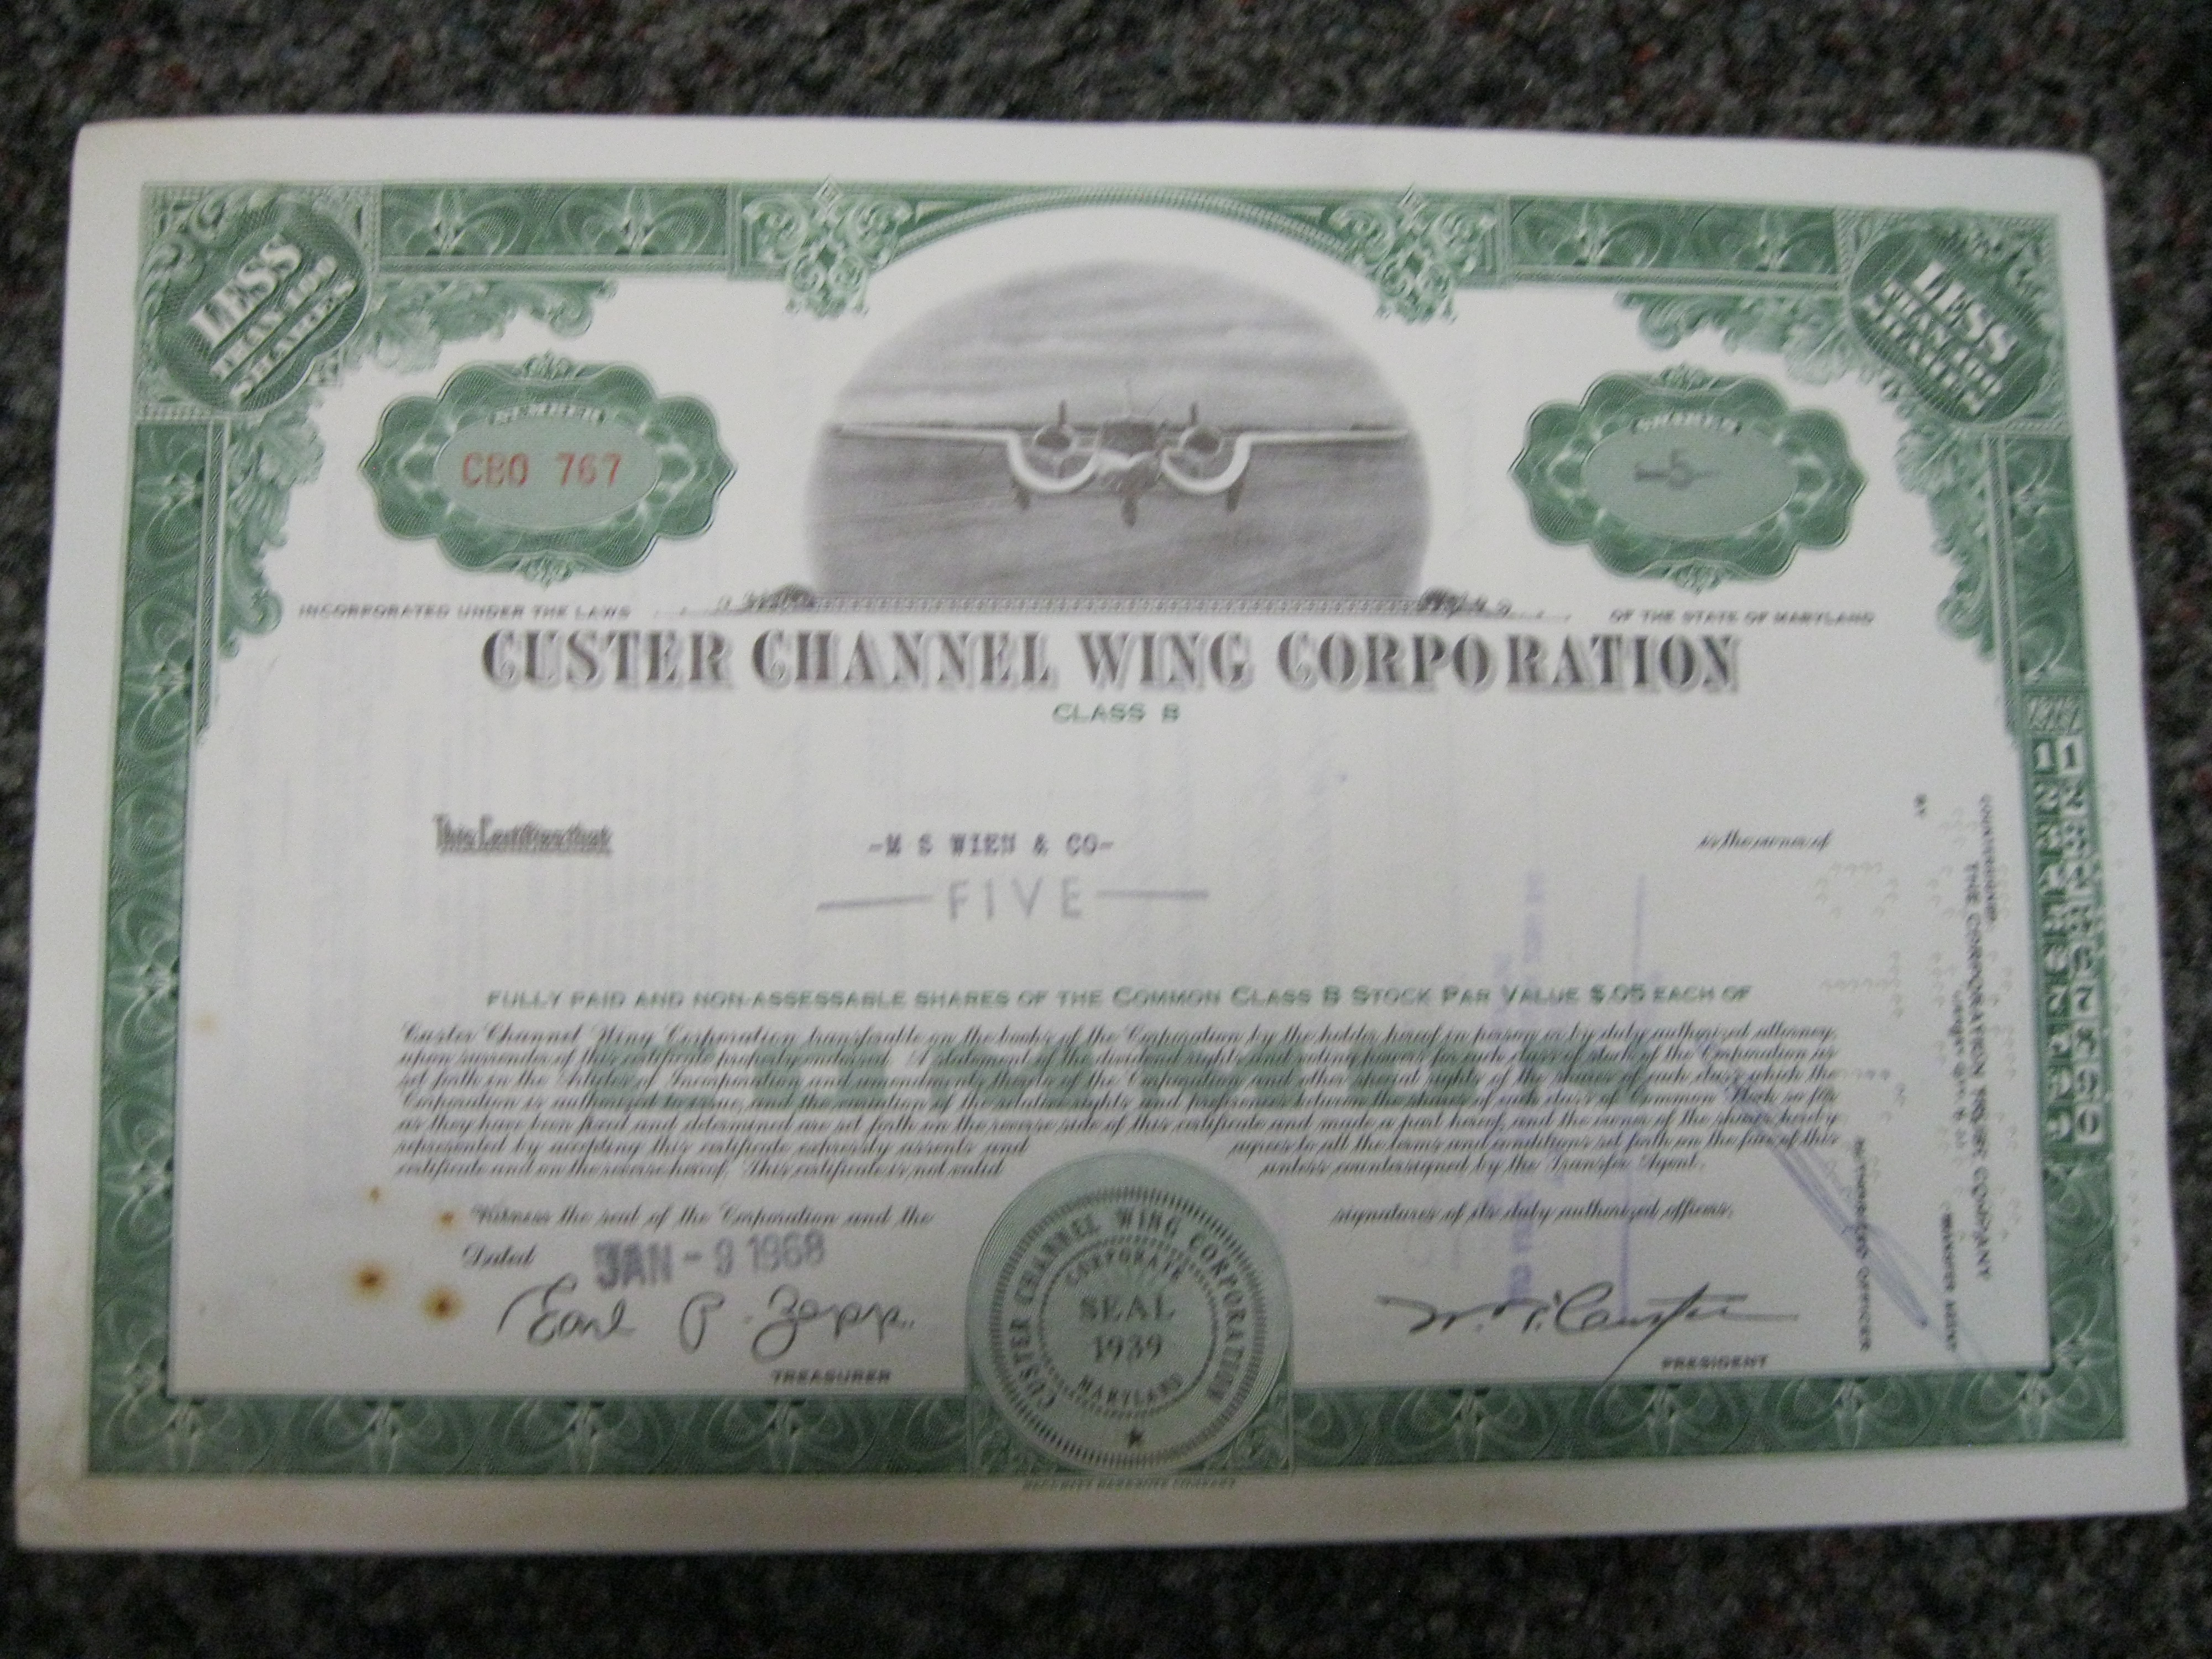 Custer Channel Wing Corporation stock certificate less than 100 shares